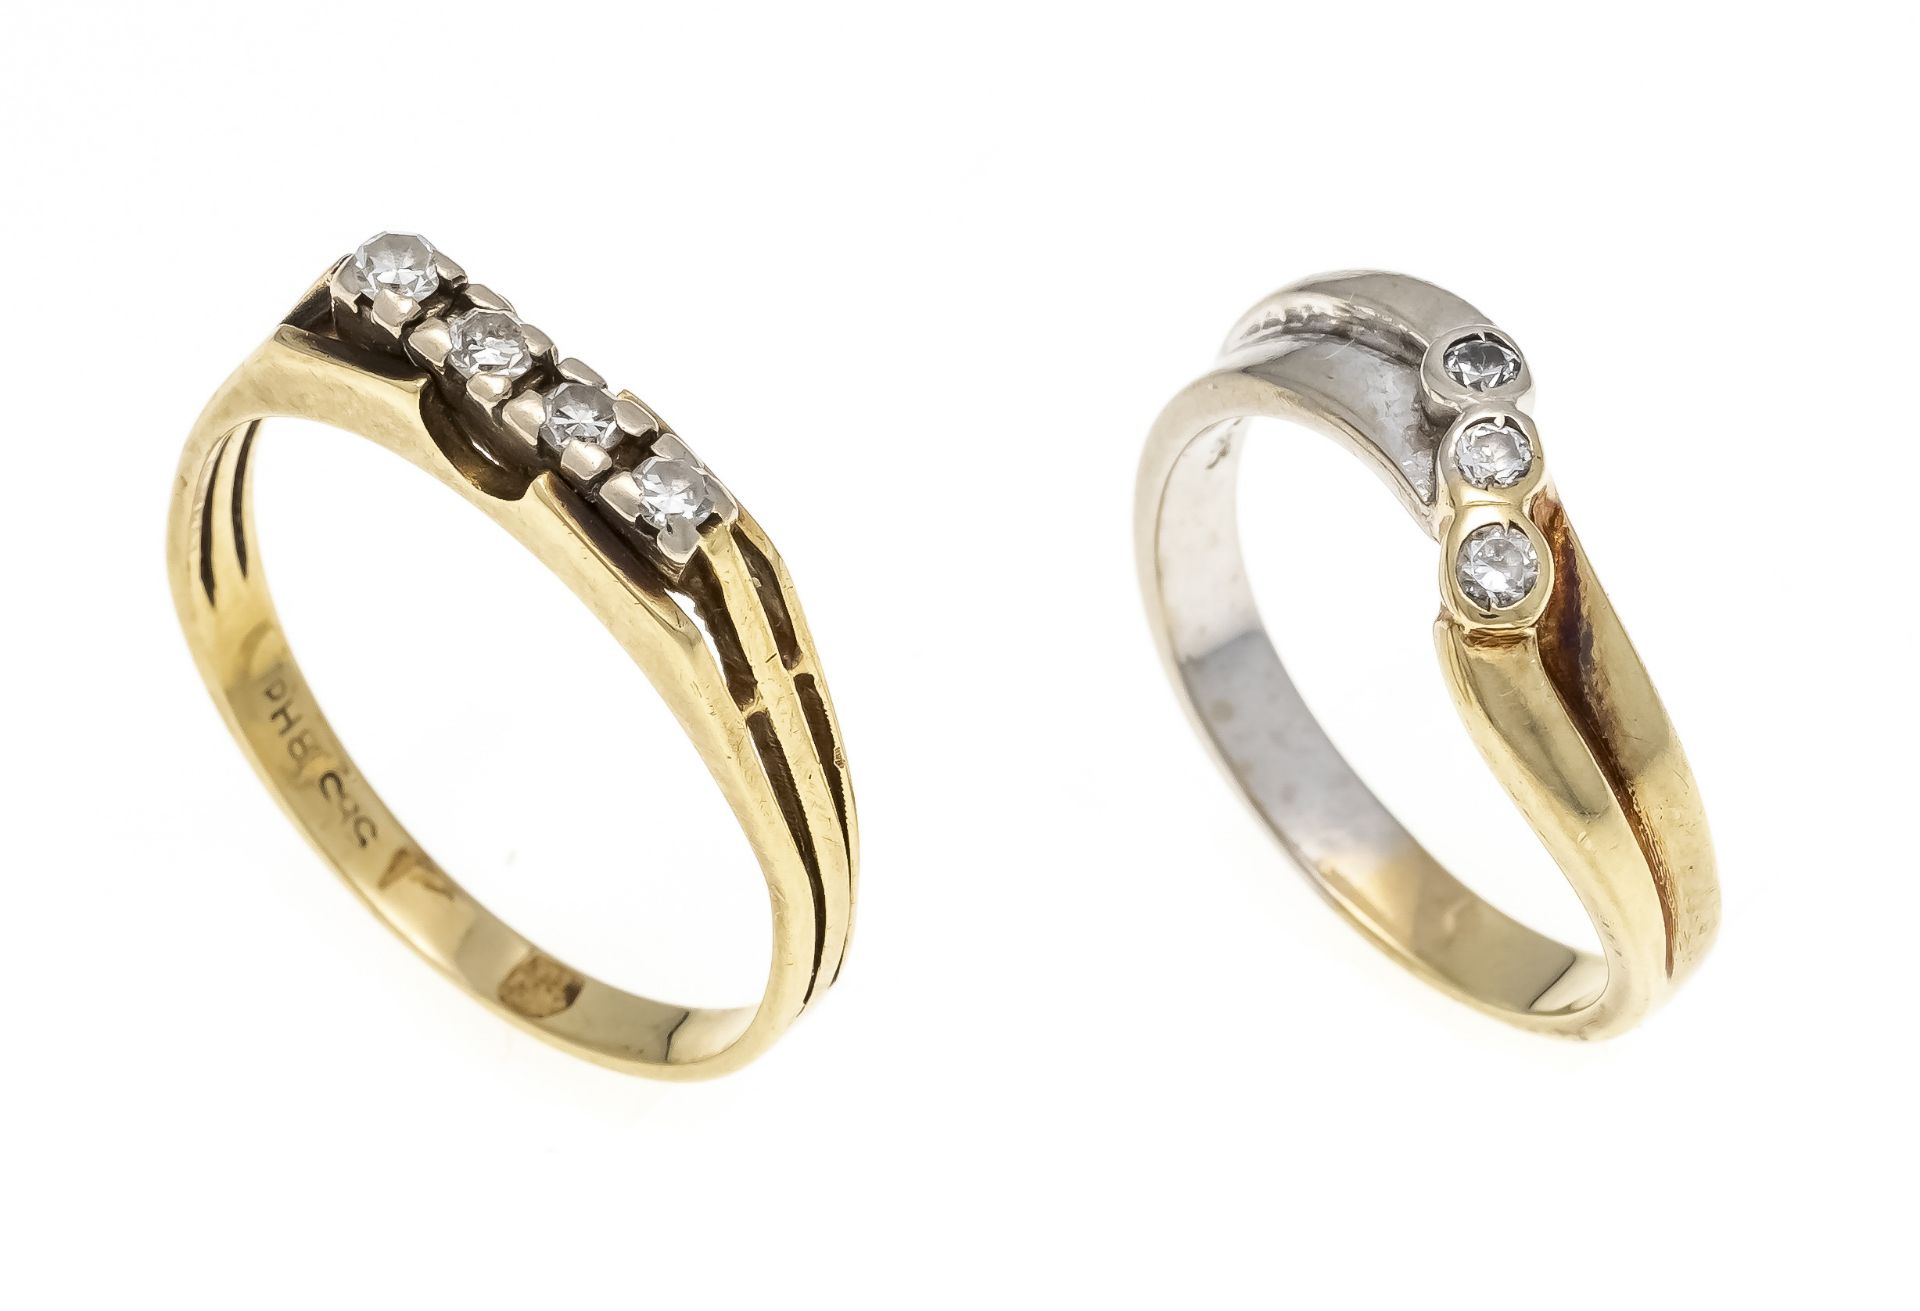 2 rings GG/WG 585/000 with 4 octagonal diamonds, total 0.10 ct l.tintedW/SI and 3 round faceted